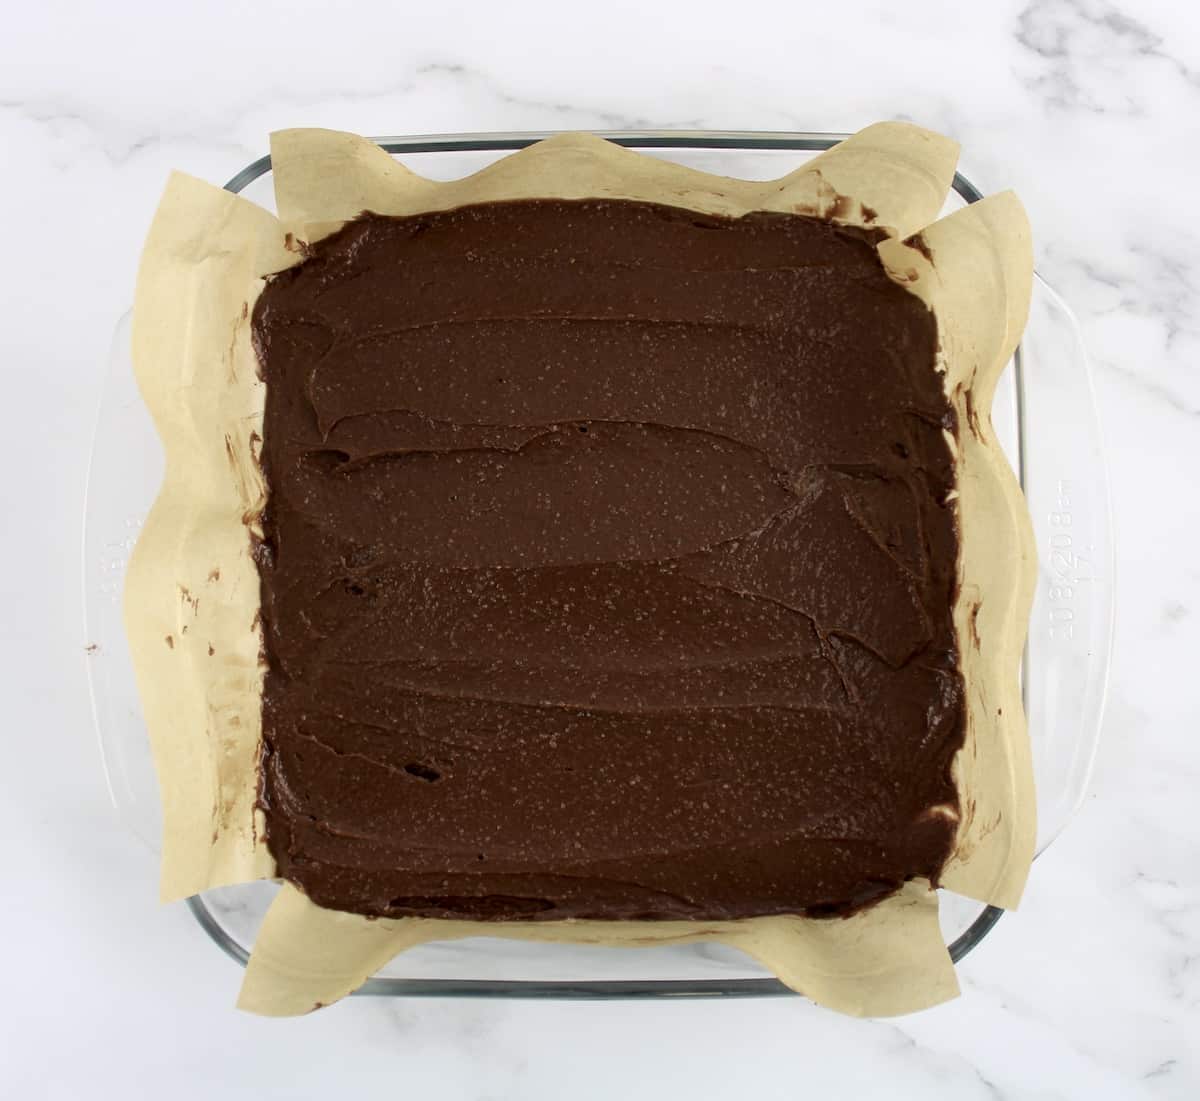 Keto Fudge Brownie batter in glass baking dish lined with parchment